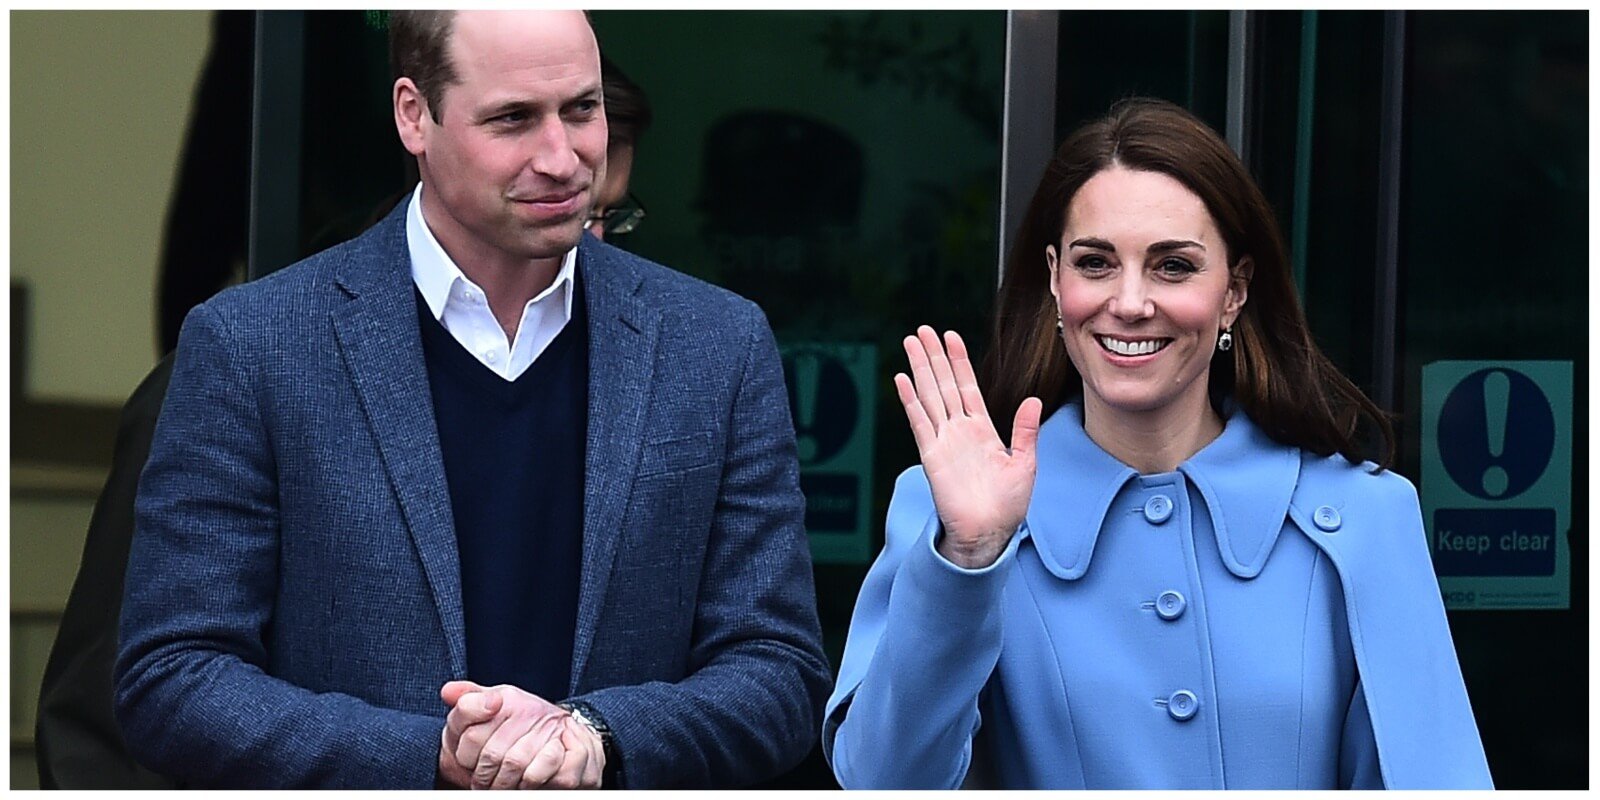 Prince William and Kate Middleton engage in a walkabout in Ballymena town centre on February 28, 2019 in Ballymena, Northern Ireland.